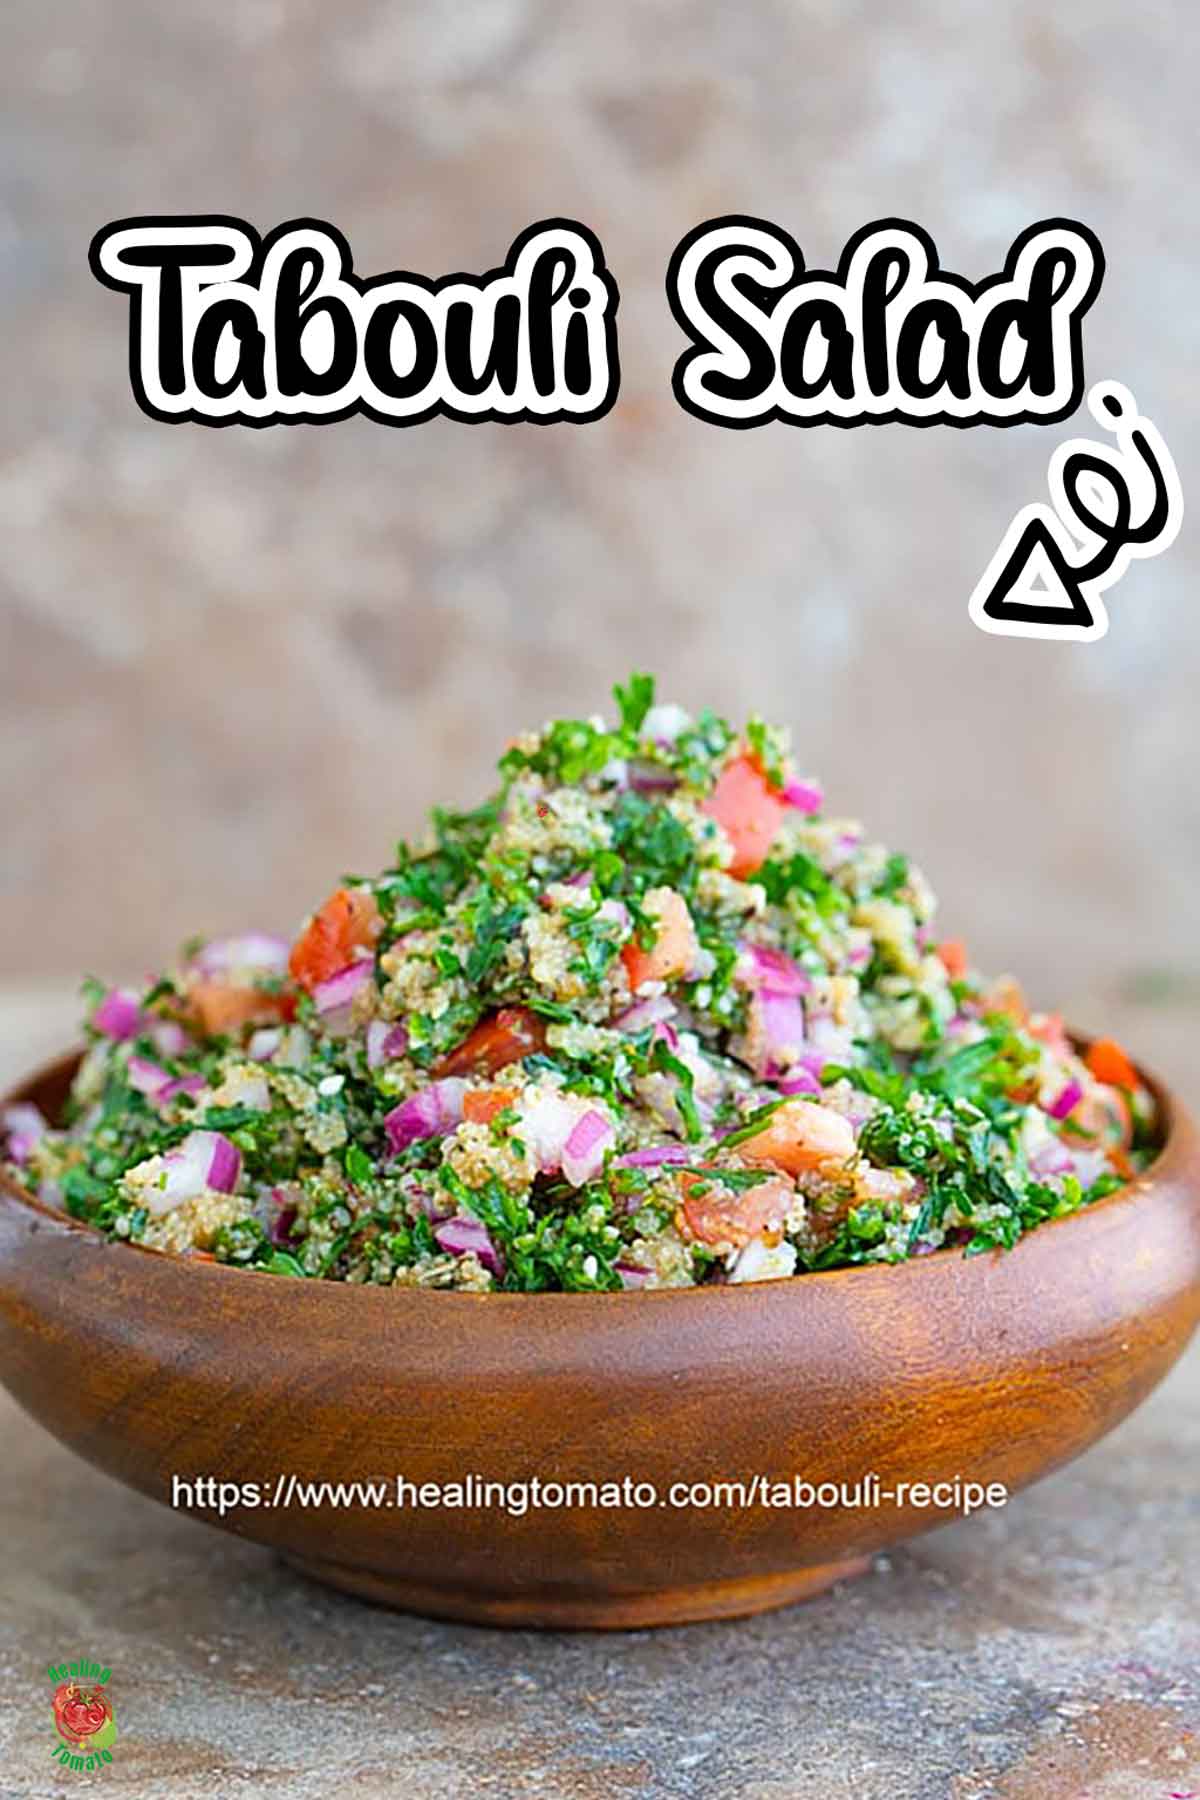 Front view of a brown bowl filled with tabouli salad